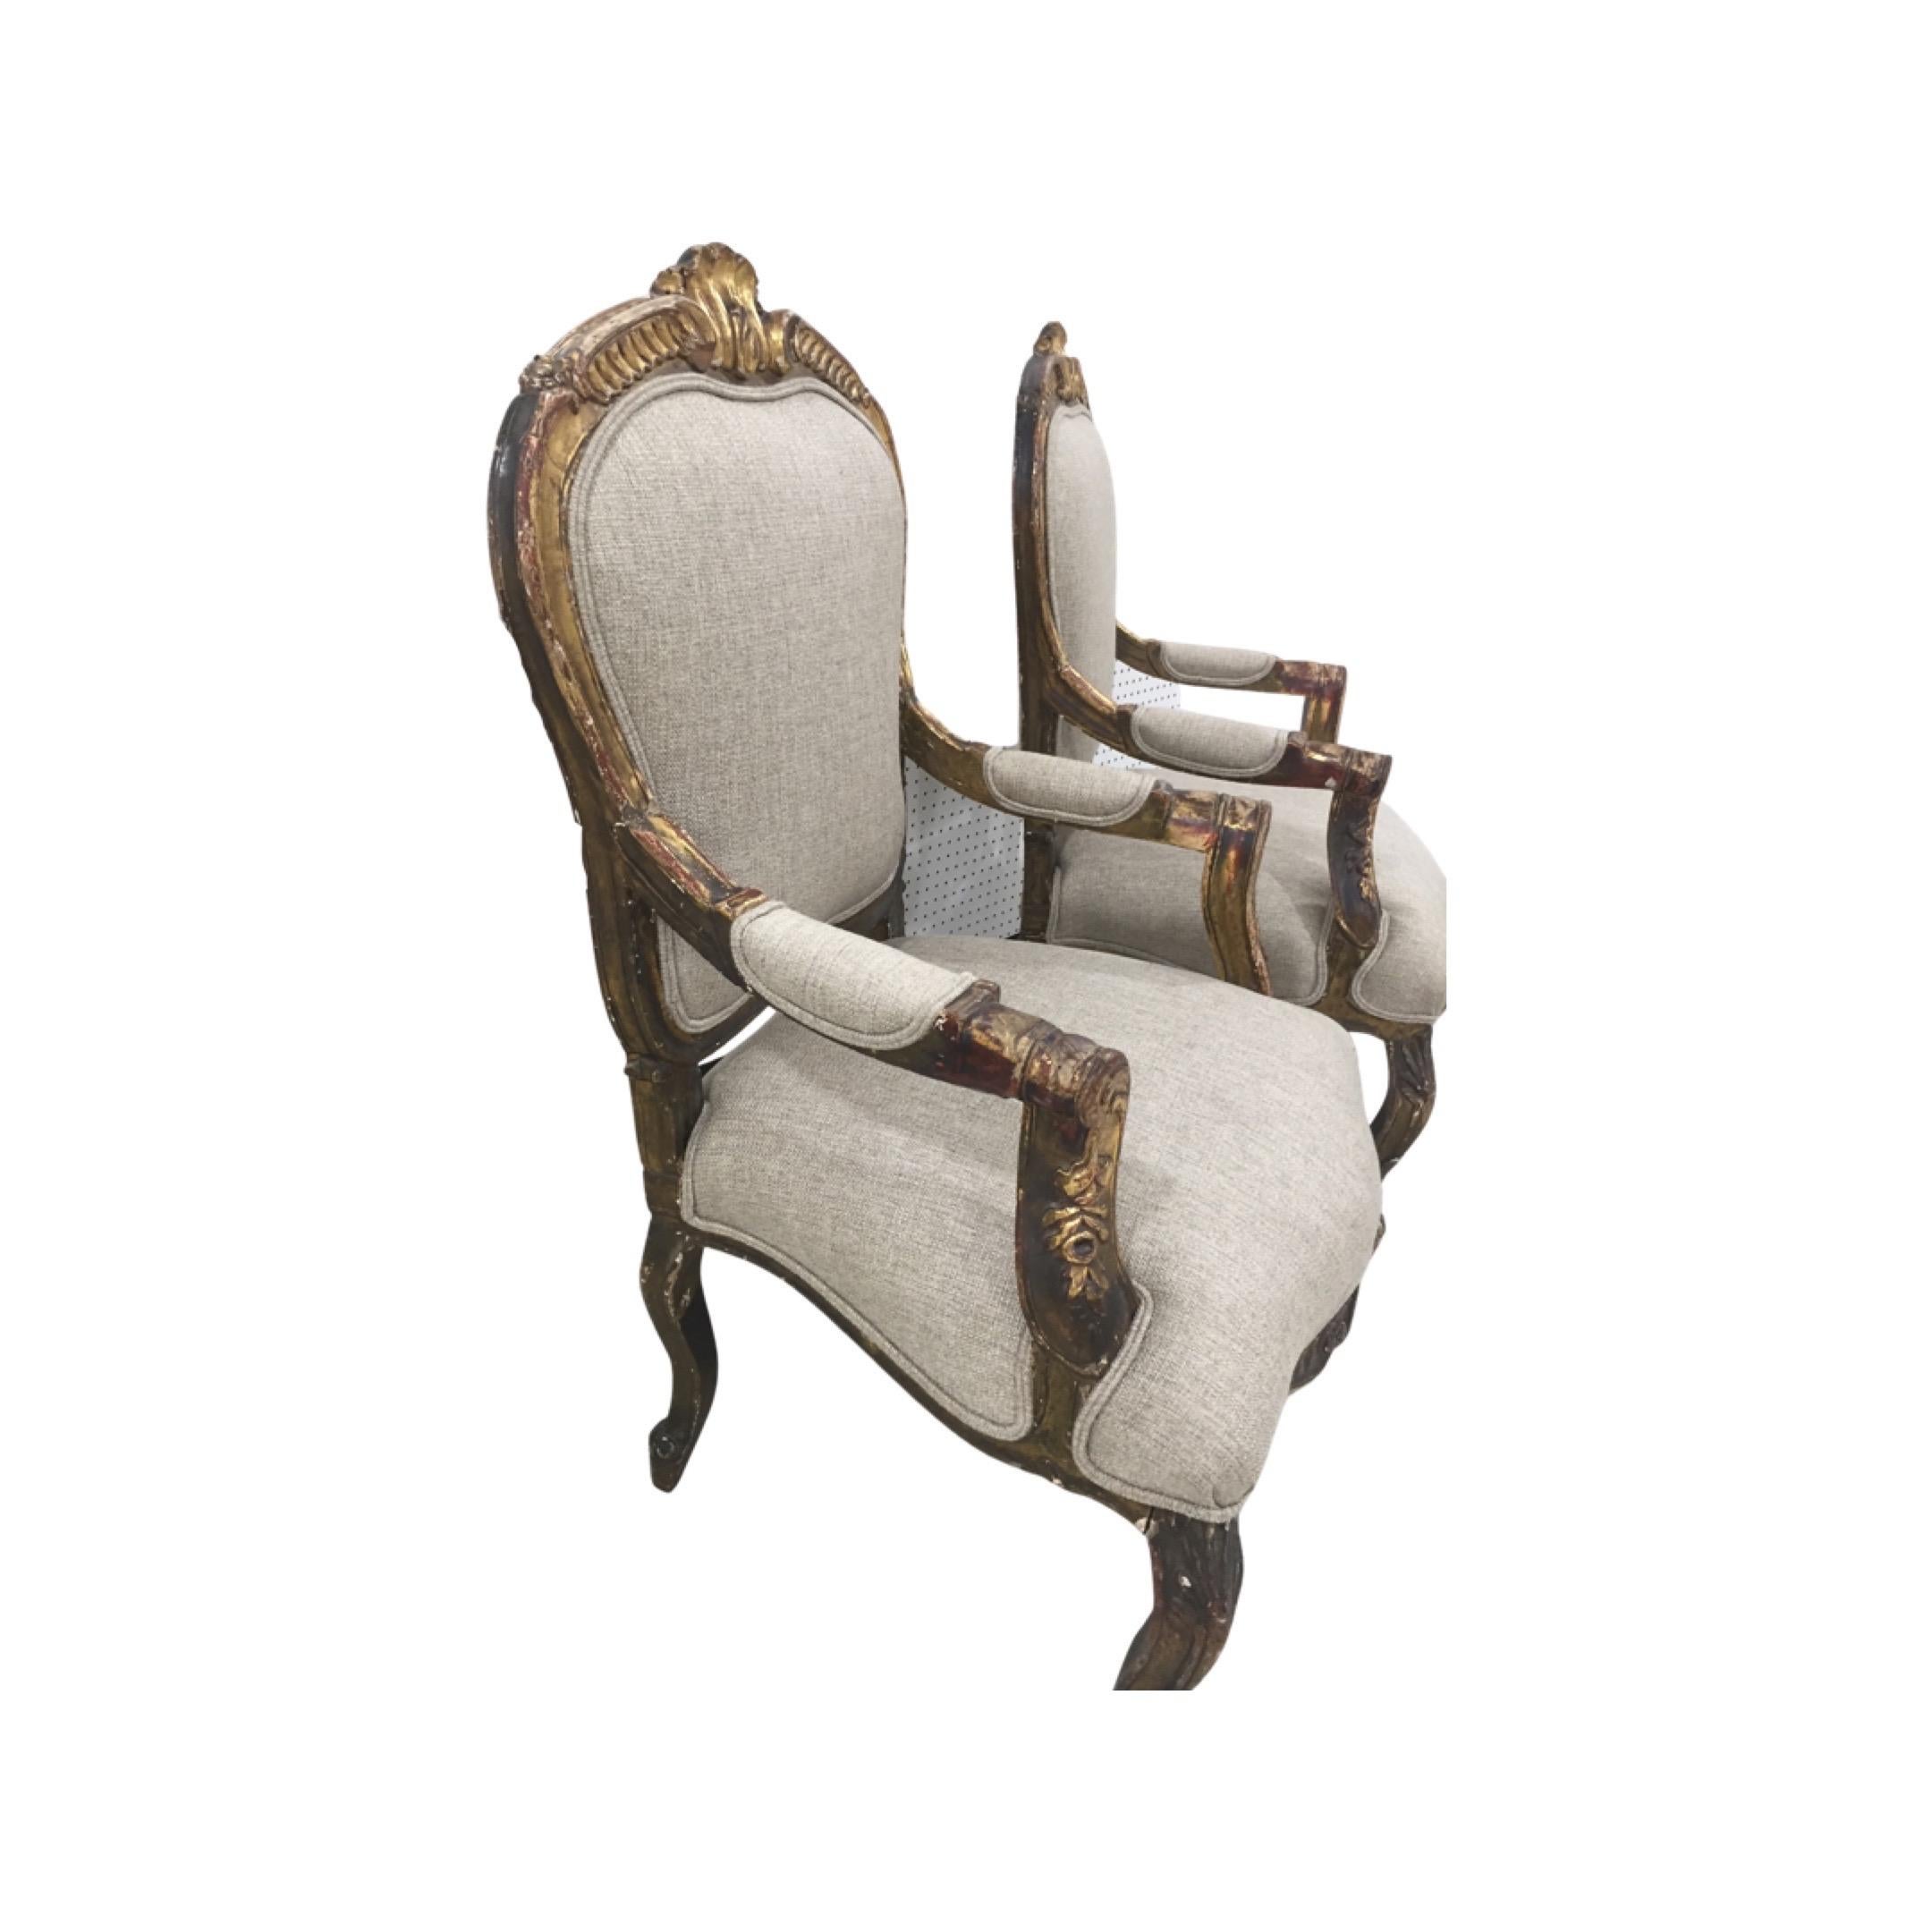 Pair of 19th C Italian painted and giltwood fauteuil armchairs in the Louis XV style. Scrolled arms and legs with applied floral decoration. Back with gilt stylized shell decoration. Chairs have gentle worn patina that indicate the age of the